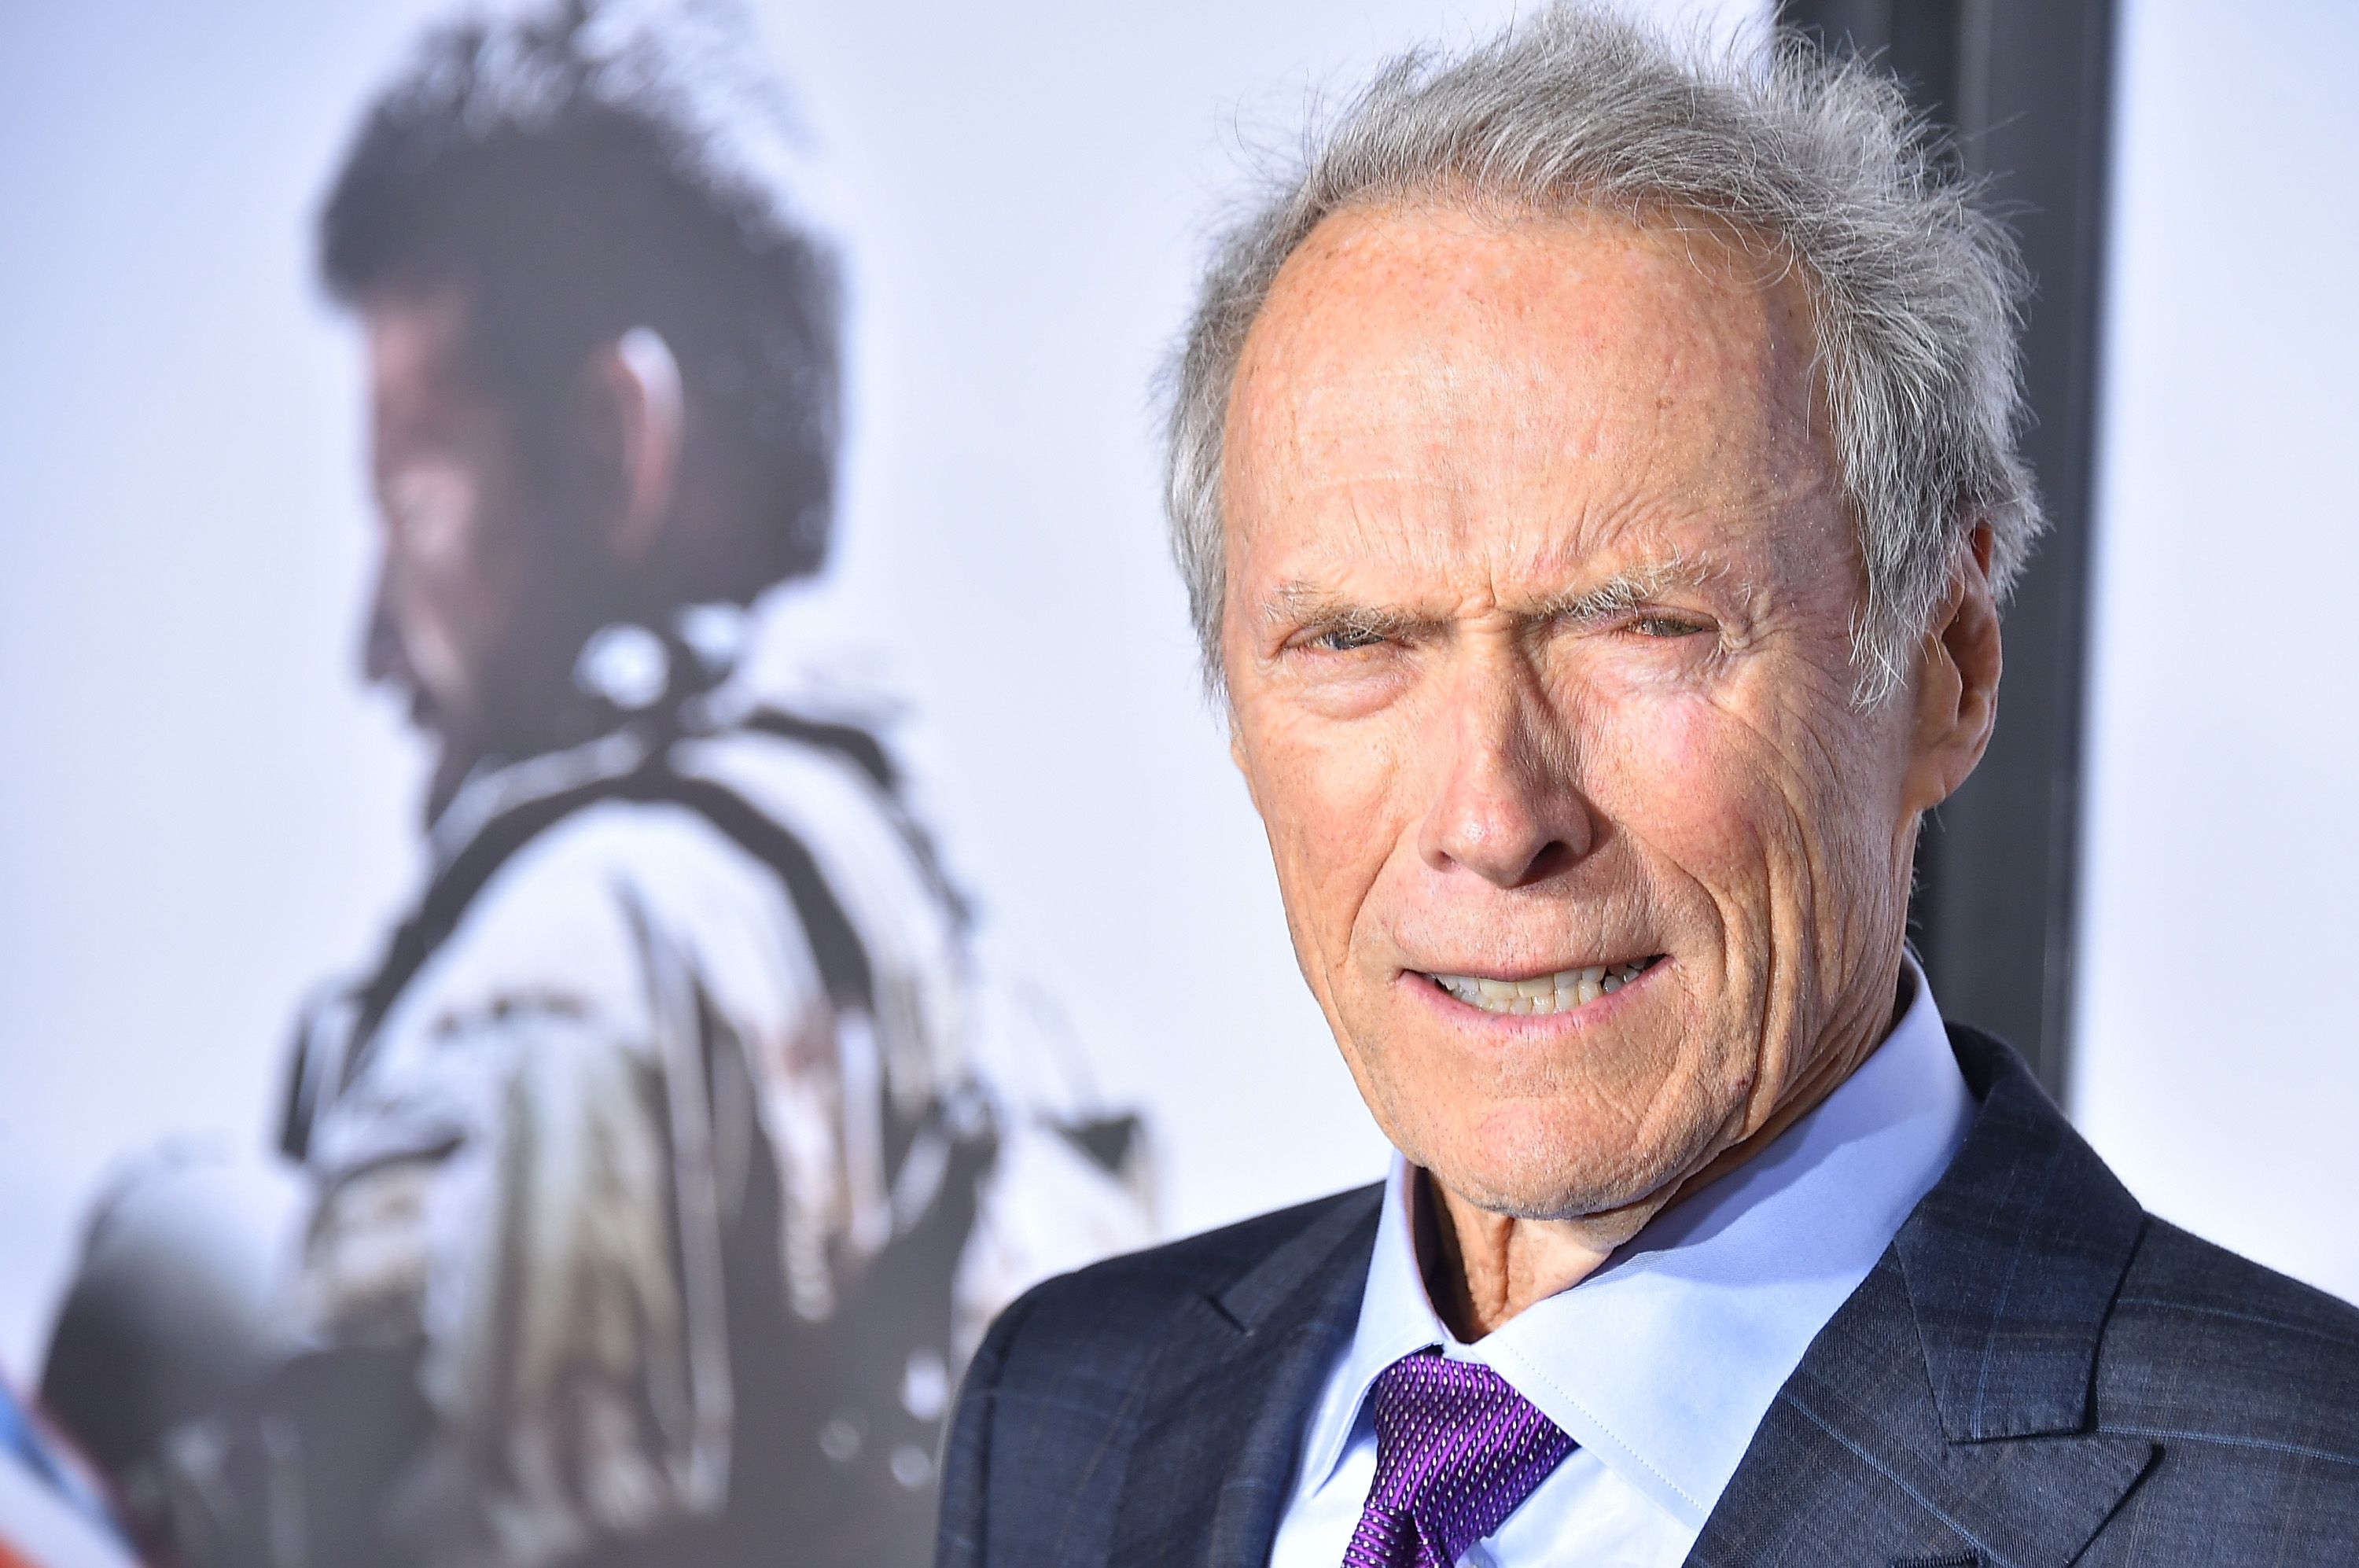 Clint Eastwood arrives at the "American Sniper" New York premiere at Frederick P. Rose Hall, Jazz at Lincoln Center on December 15, 2014 in New York City | Photo: Getty Images